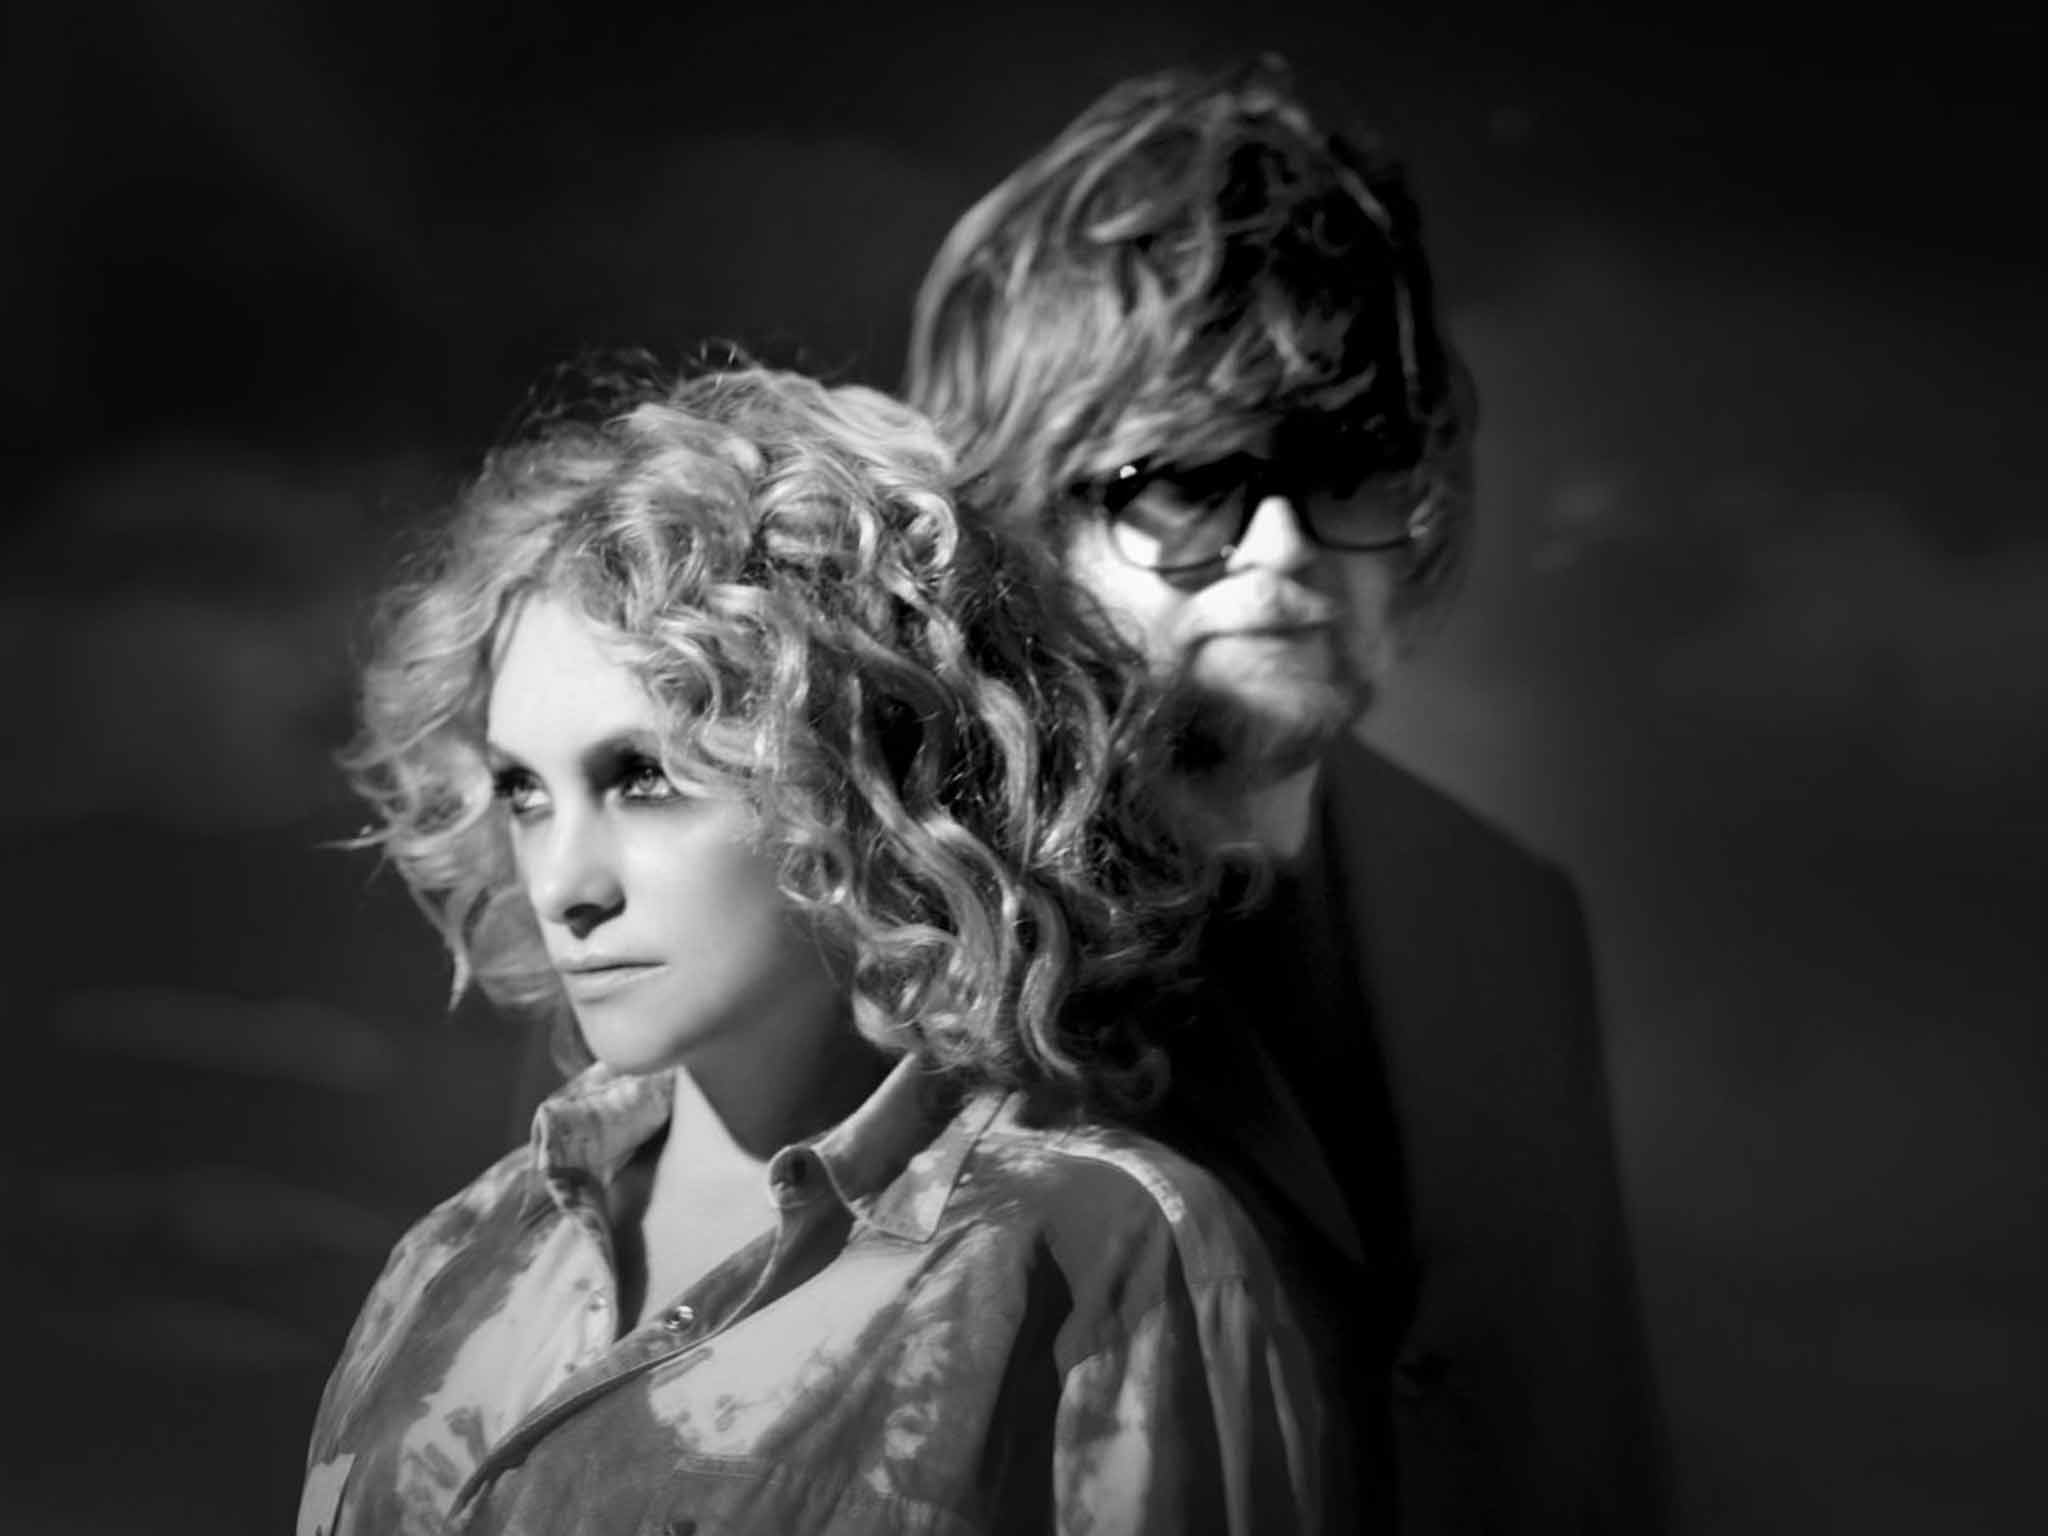 Alison Goldfrapp and Will Gregory